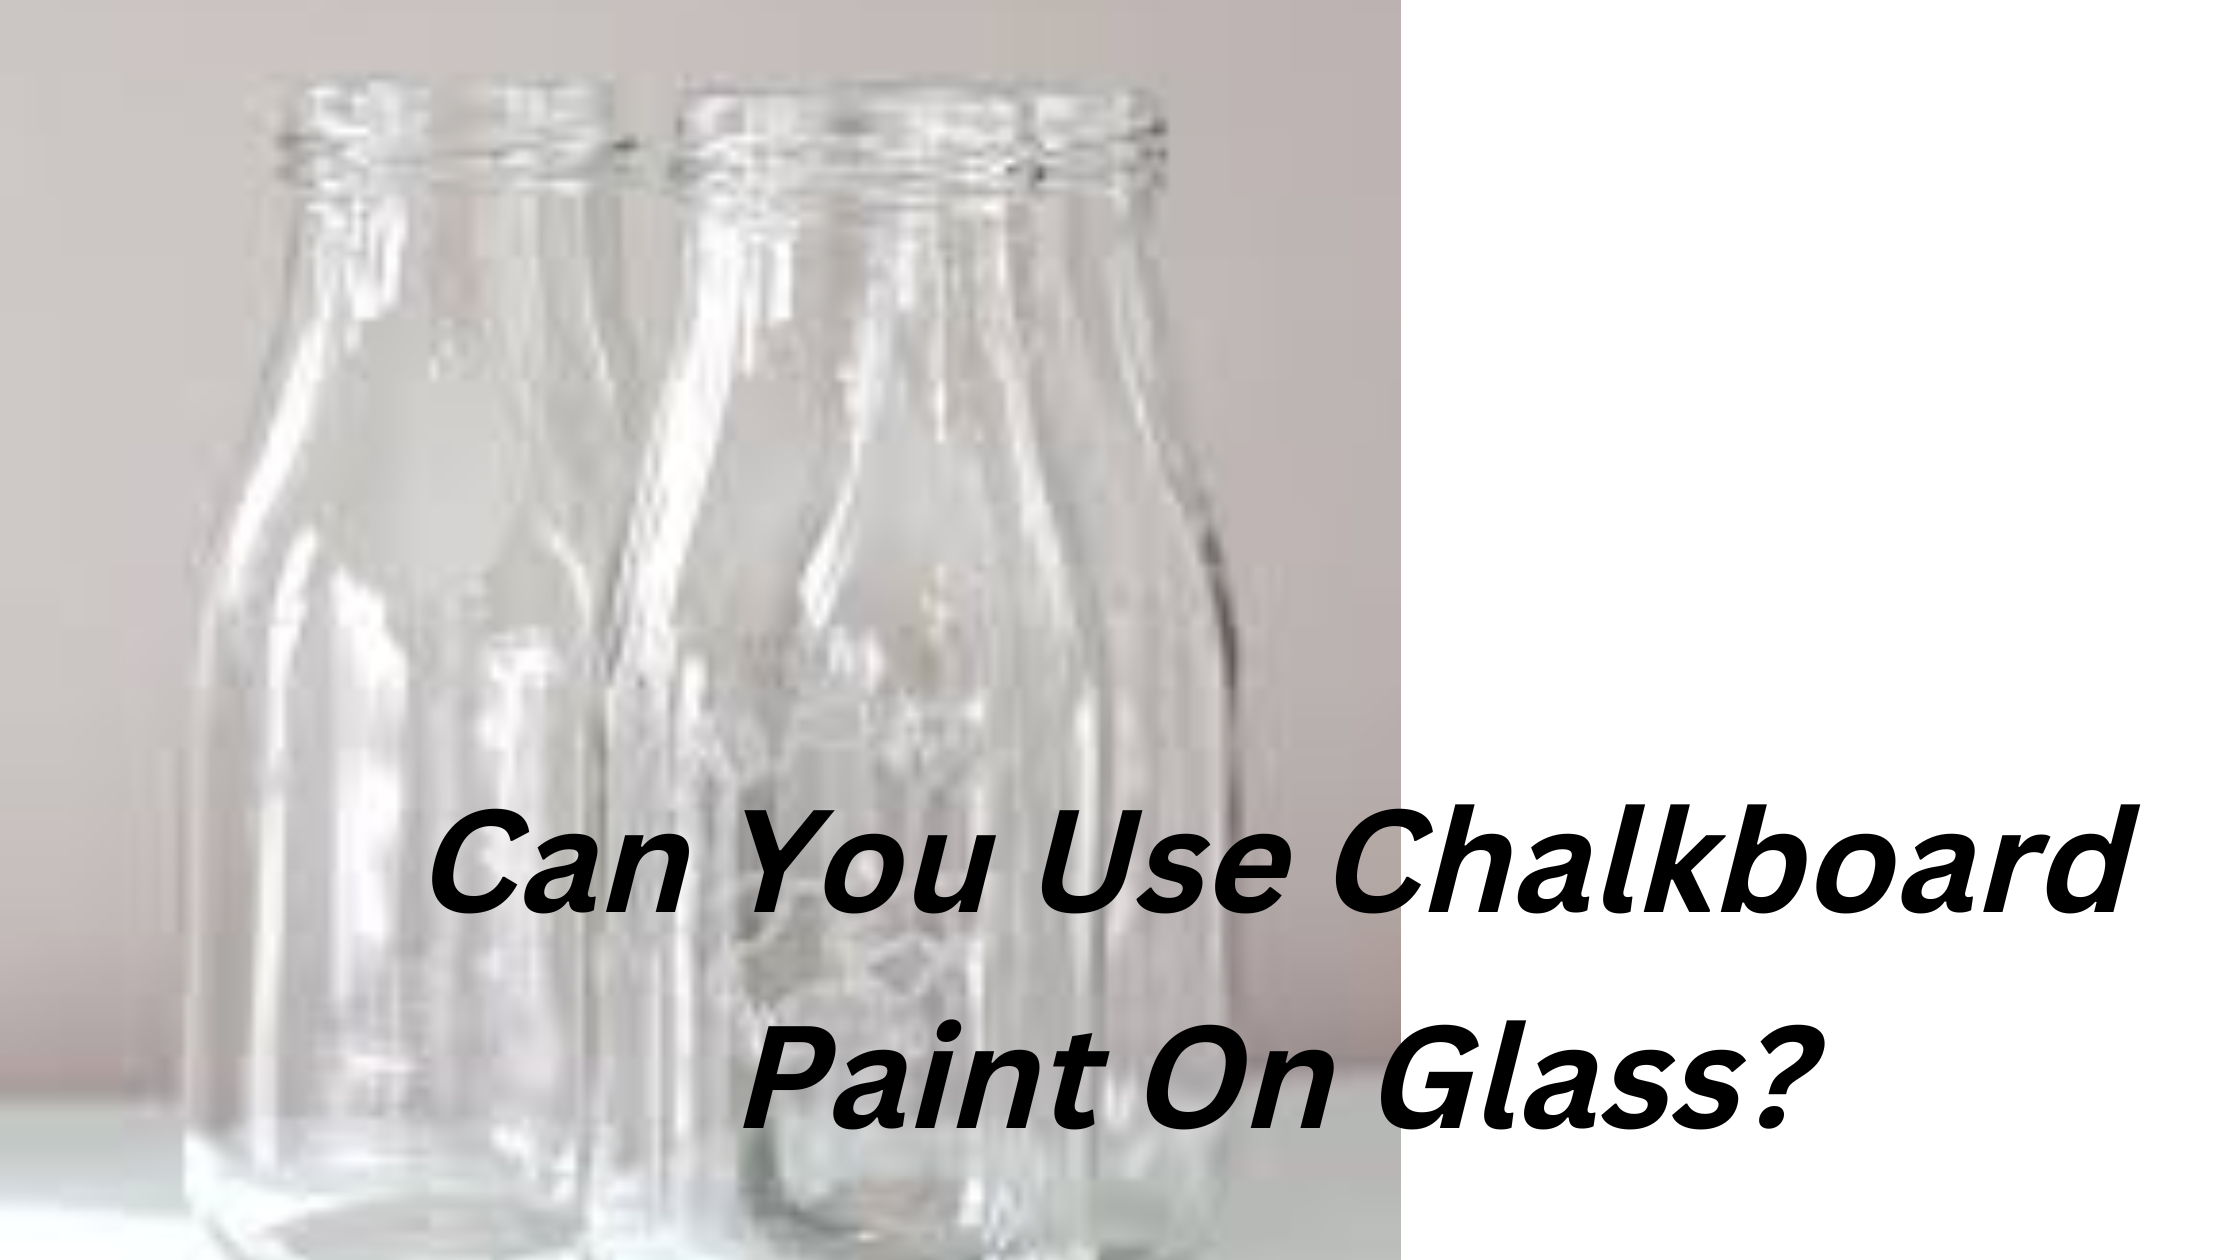 Can You Use Chalkboard Paint On Glass?